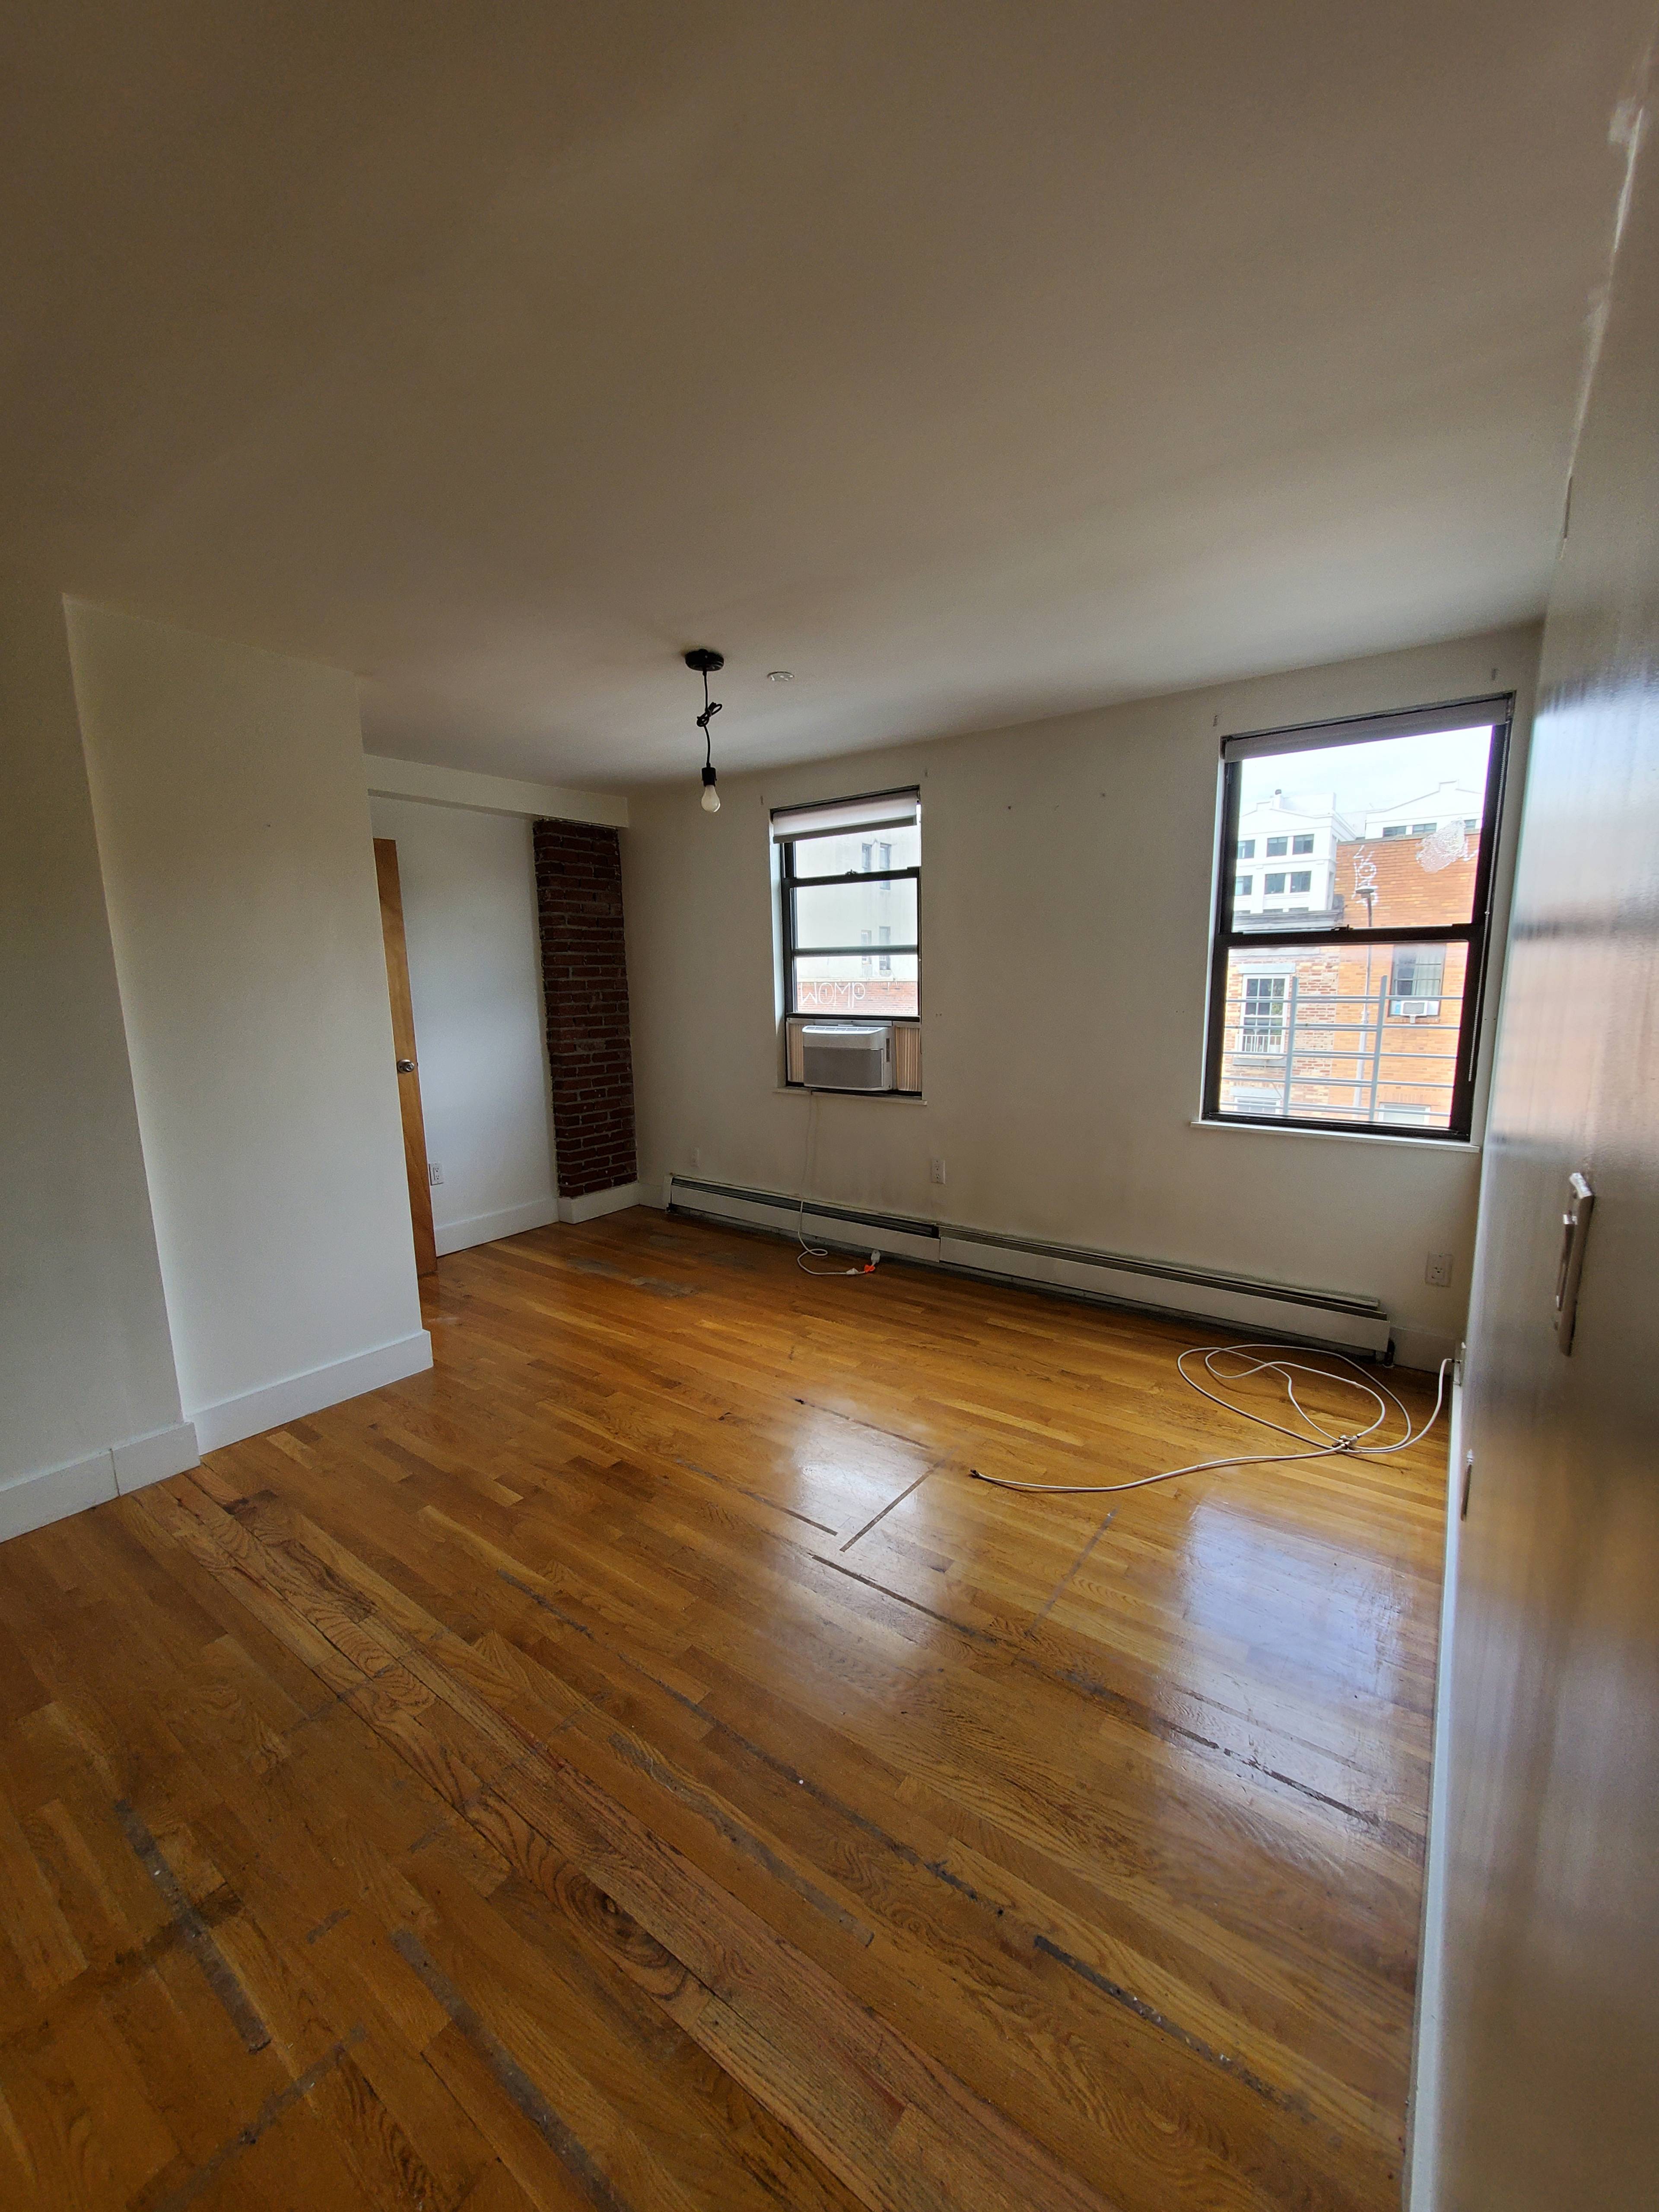 Location! Location! Location! Spacious Apartment in the Heart of Williamsburg